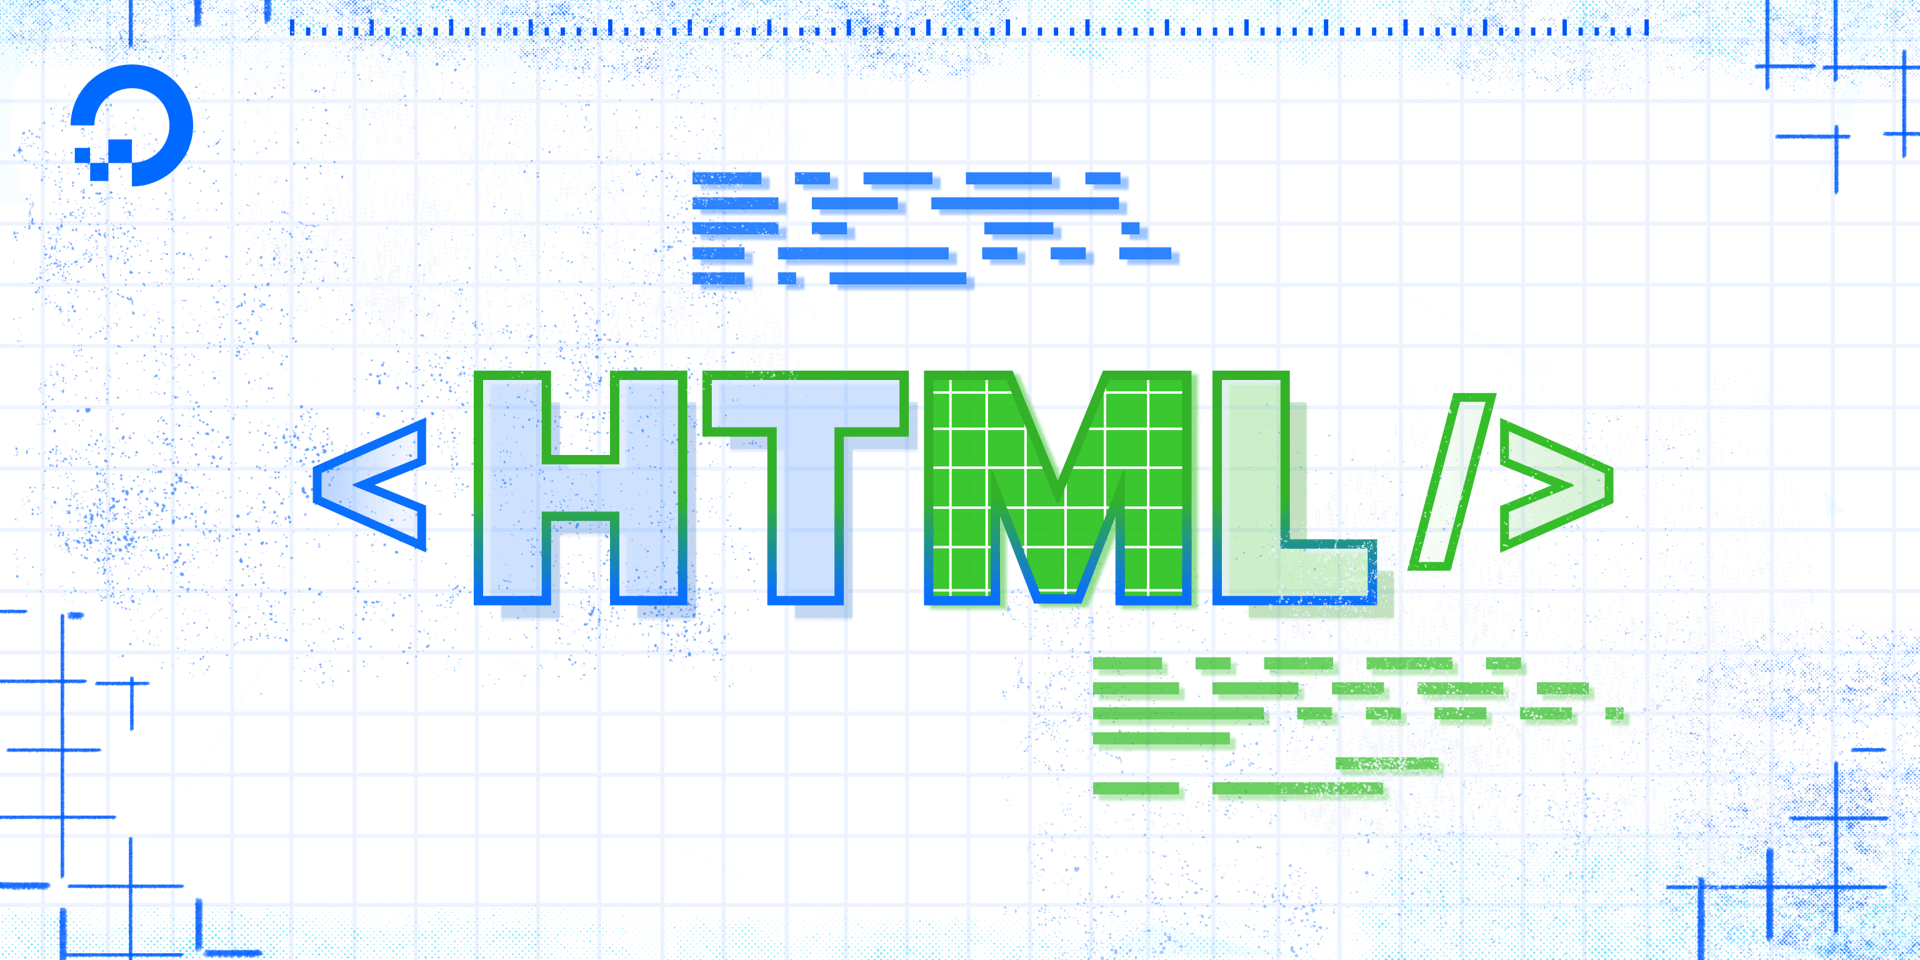 How To Build A Website With HTML: A DigitalOcean Workshop Kit